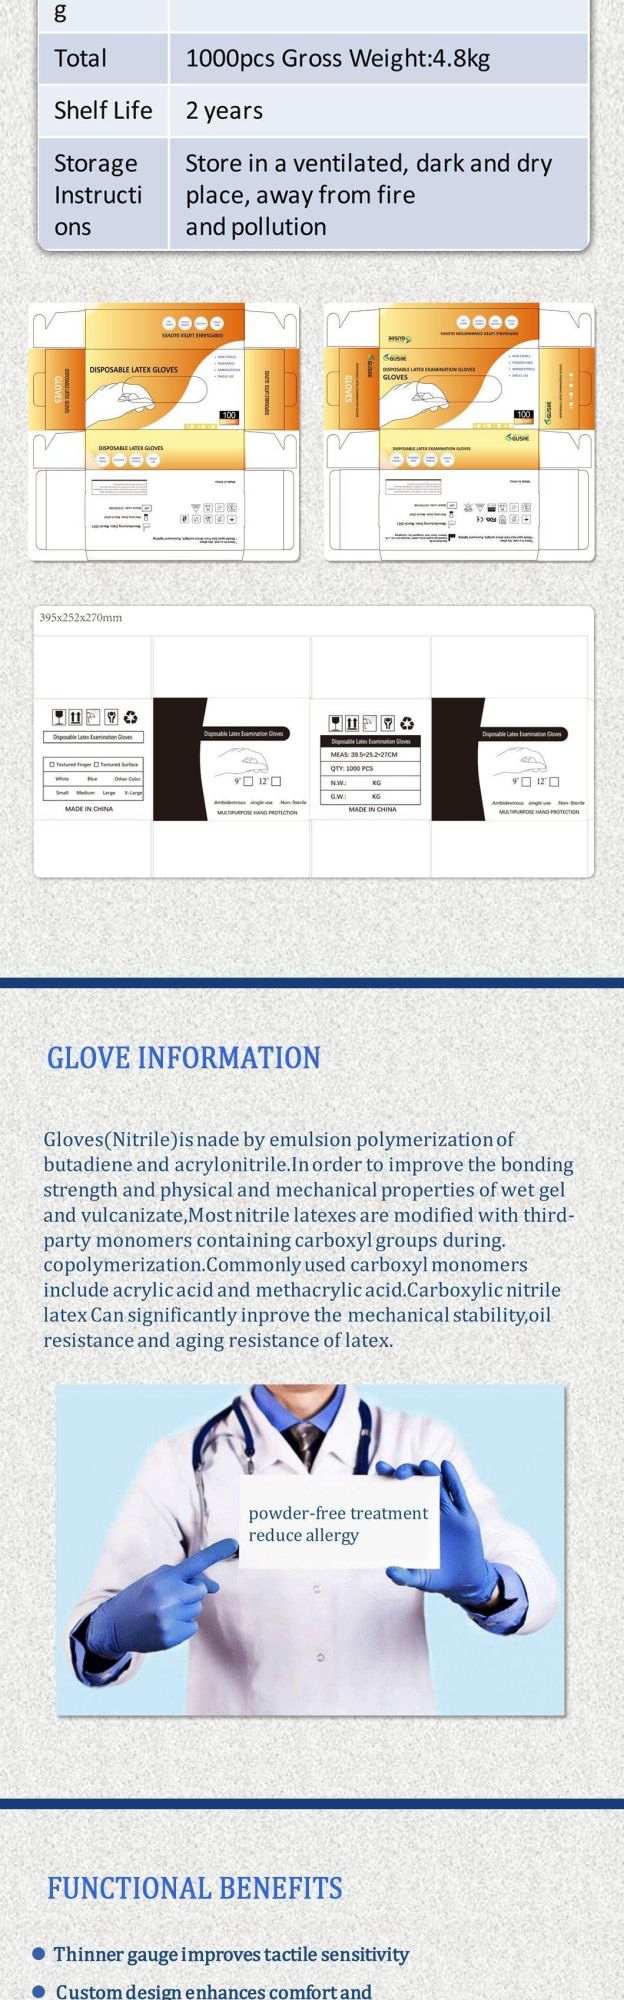 Powdered and Powder Free Good Scalability Smooth Protective Examination Medical Latex Gloves